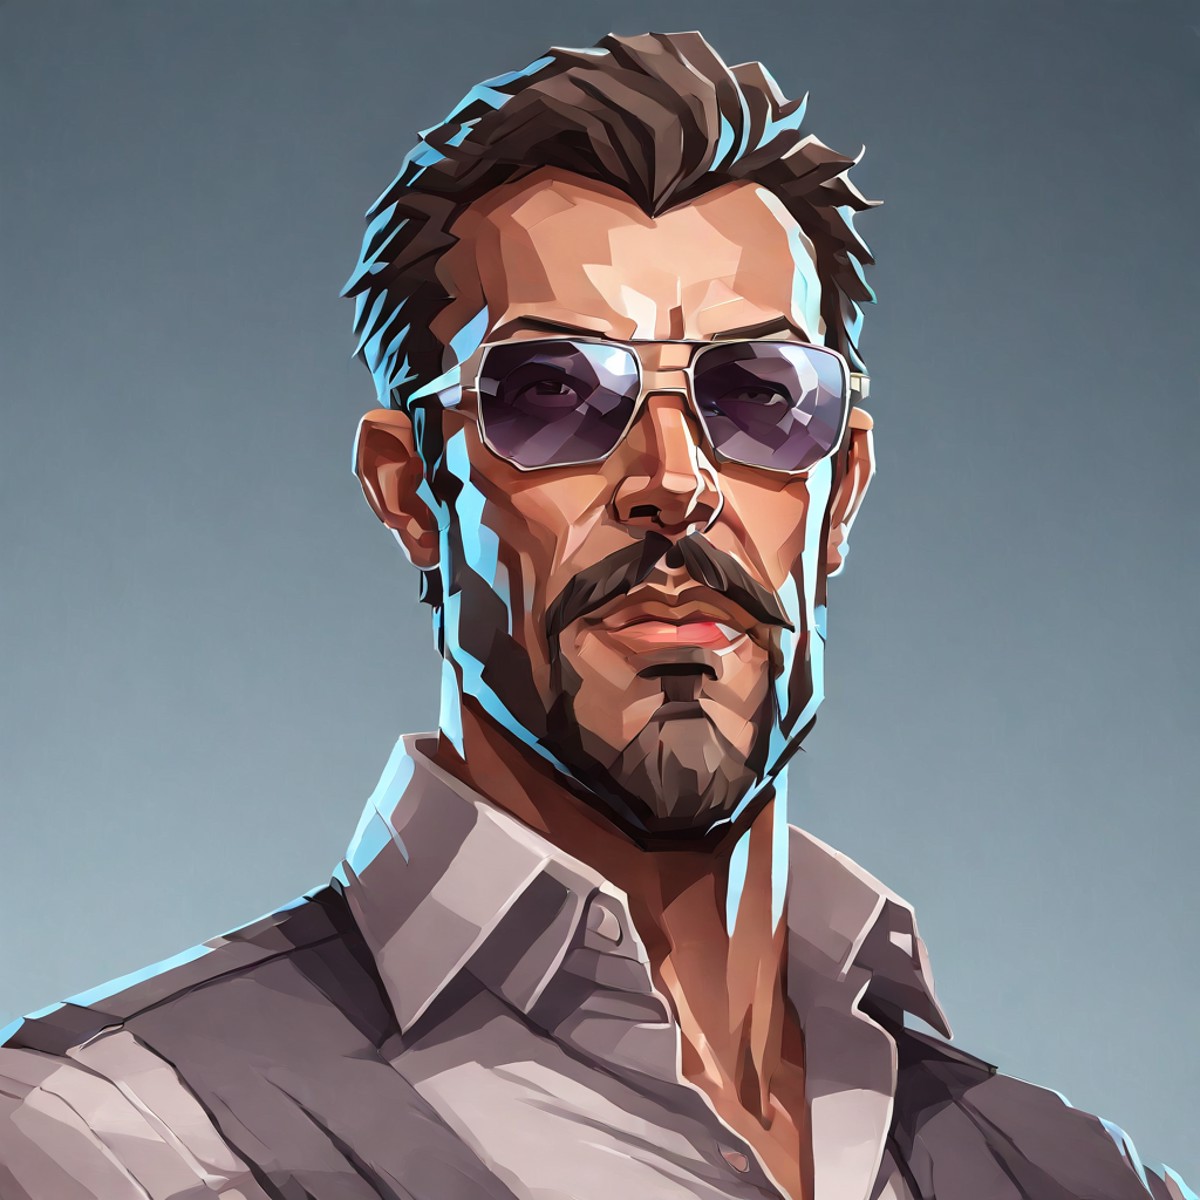 a closeup picture of a man with short brown hair and goatee moustache, wearing sunglasses, wearing a white dress shirt and...